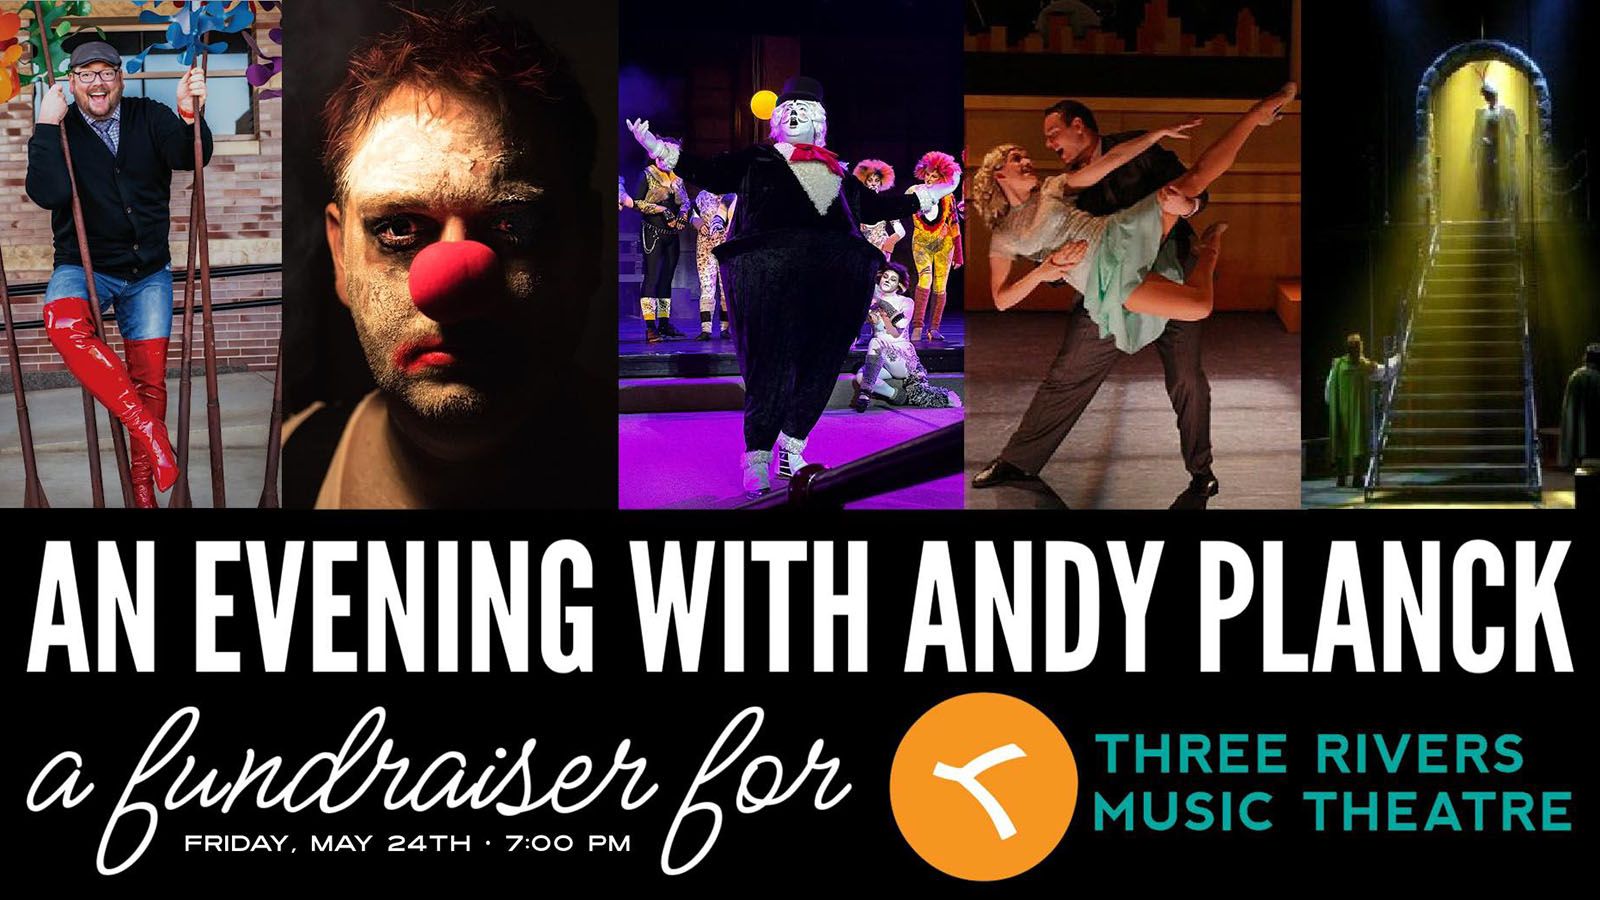 The Three Rivers Music Theatre's An Evening with Andy Planck will be Friday, May 24.